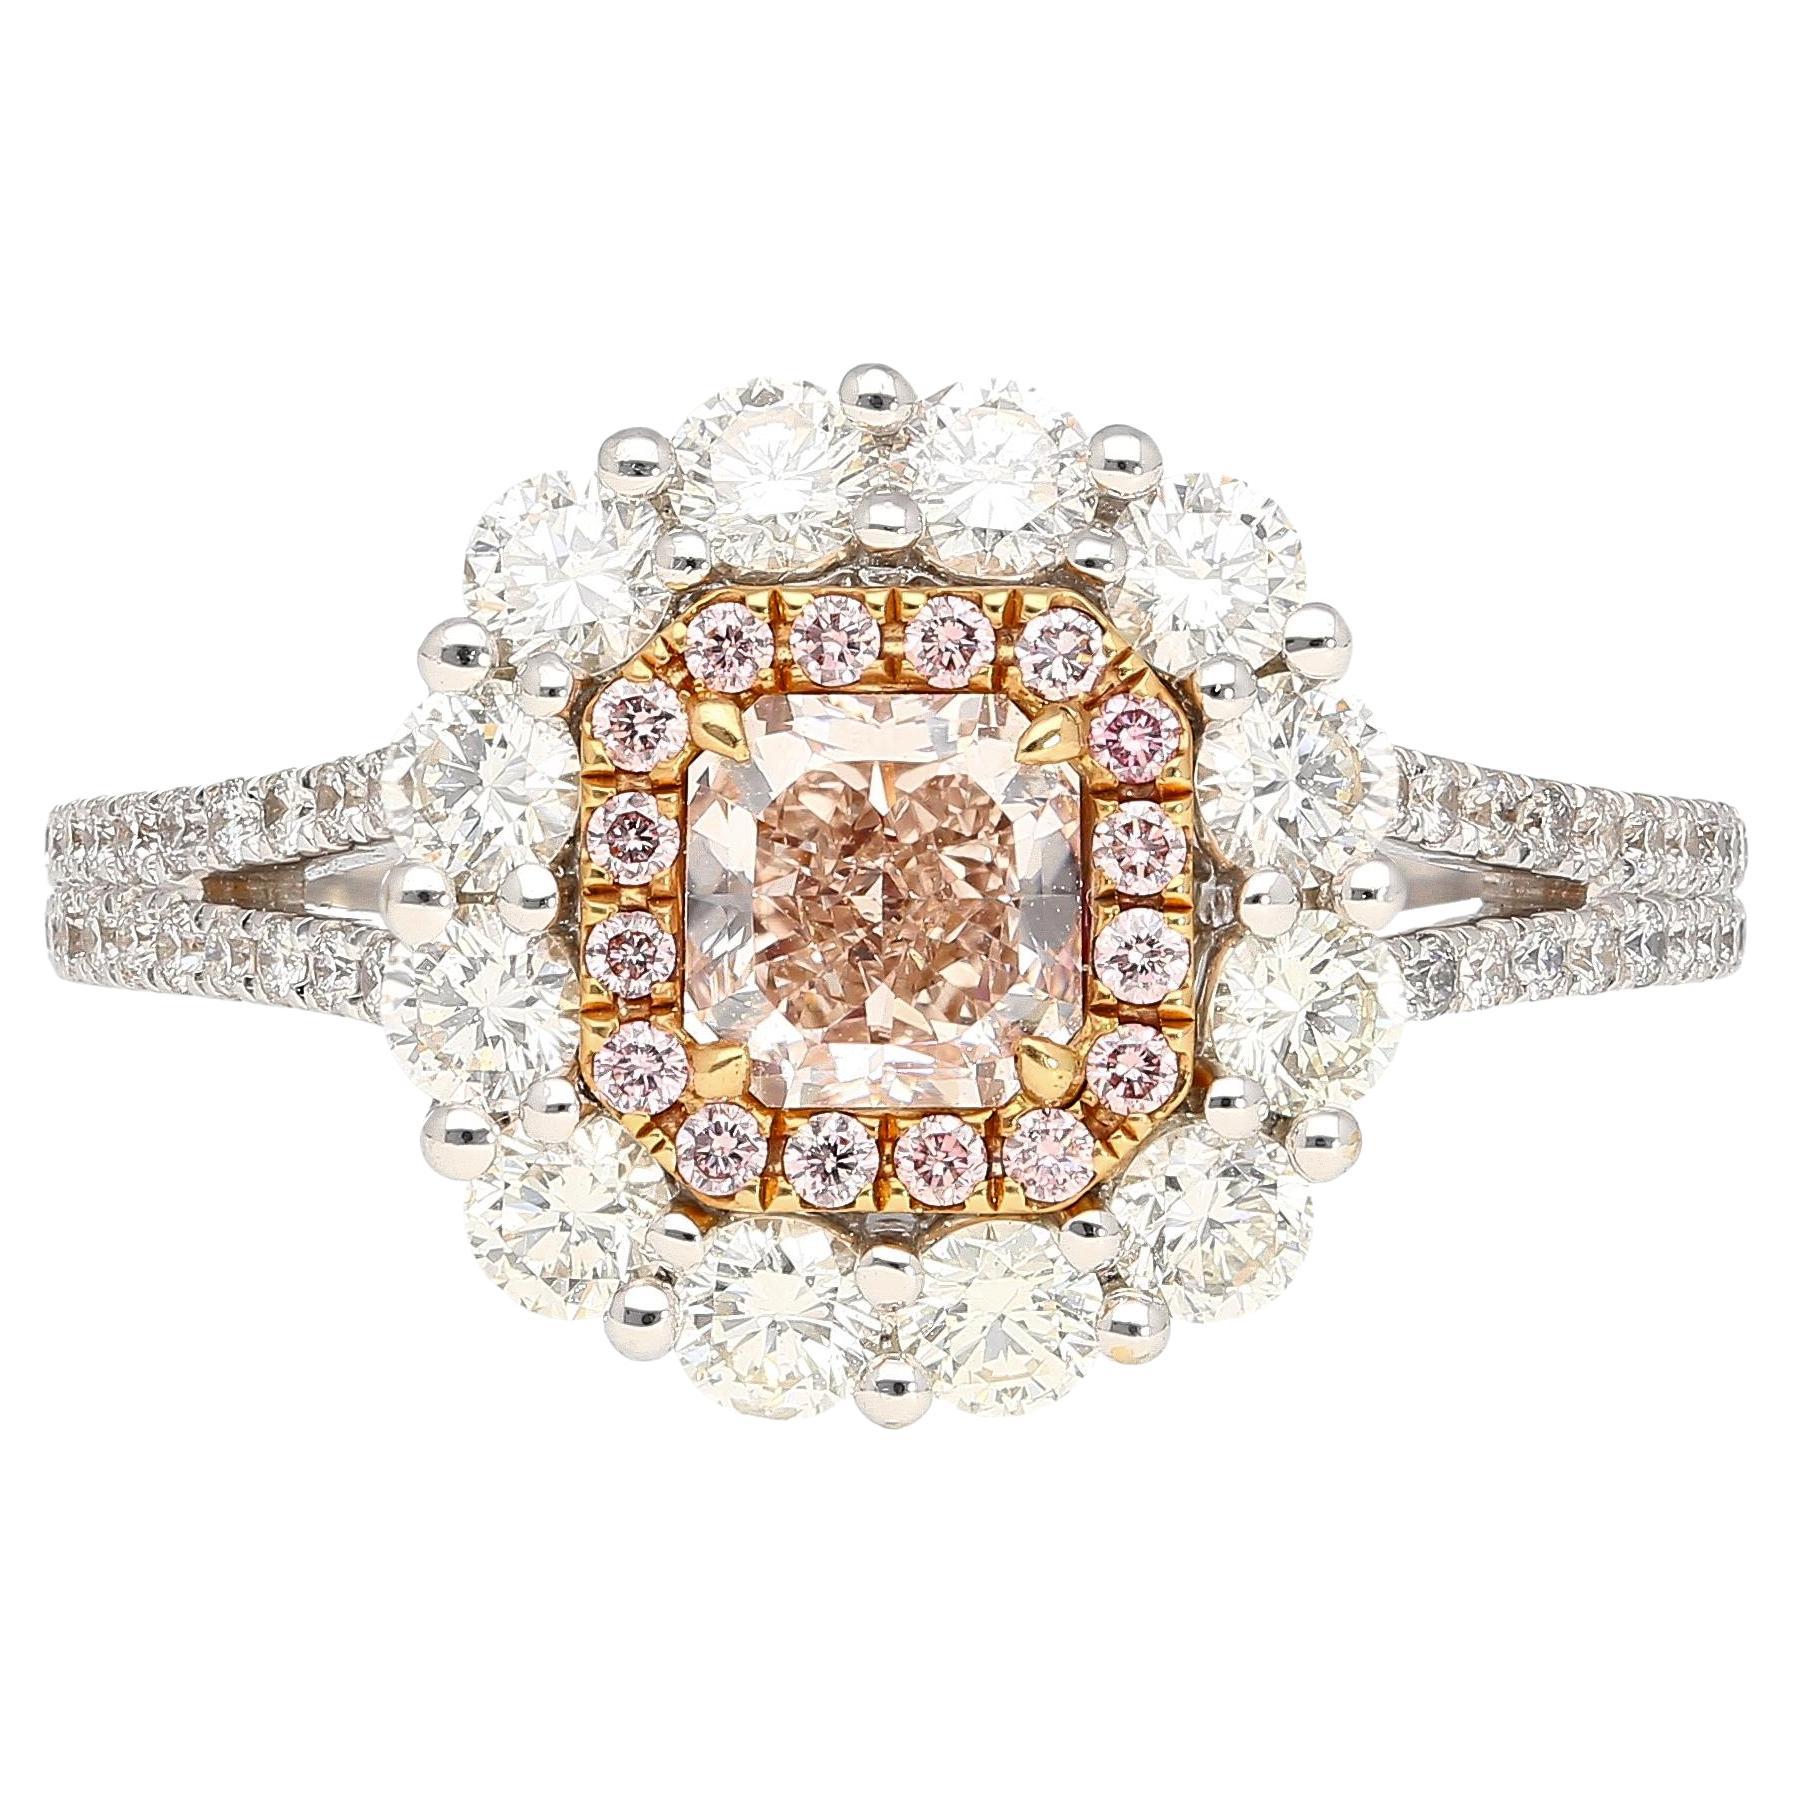 GIA Certified 1.51 Carat Fancy Light Brown Pink Internally Flawless Diamond Ring For Sale